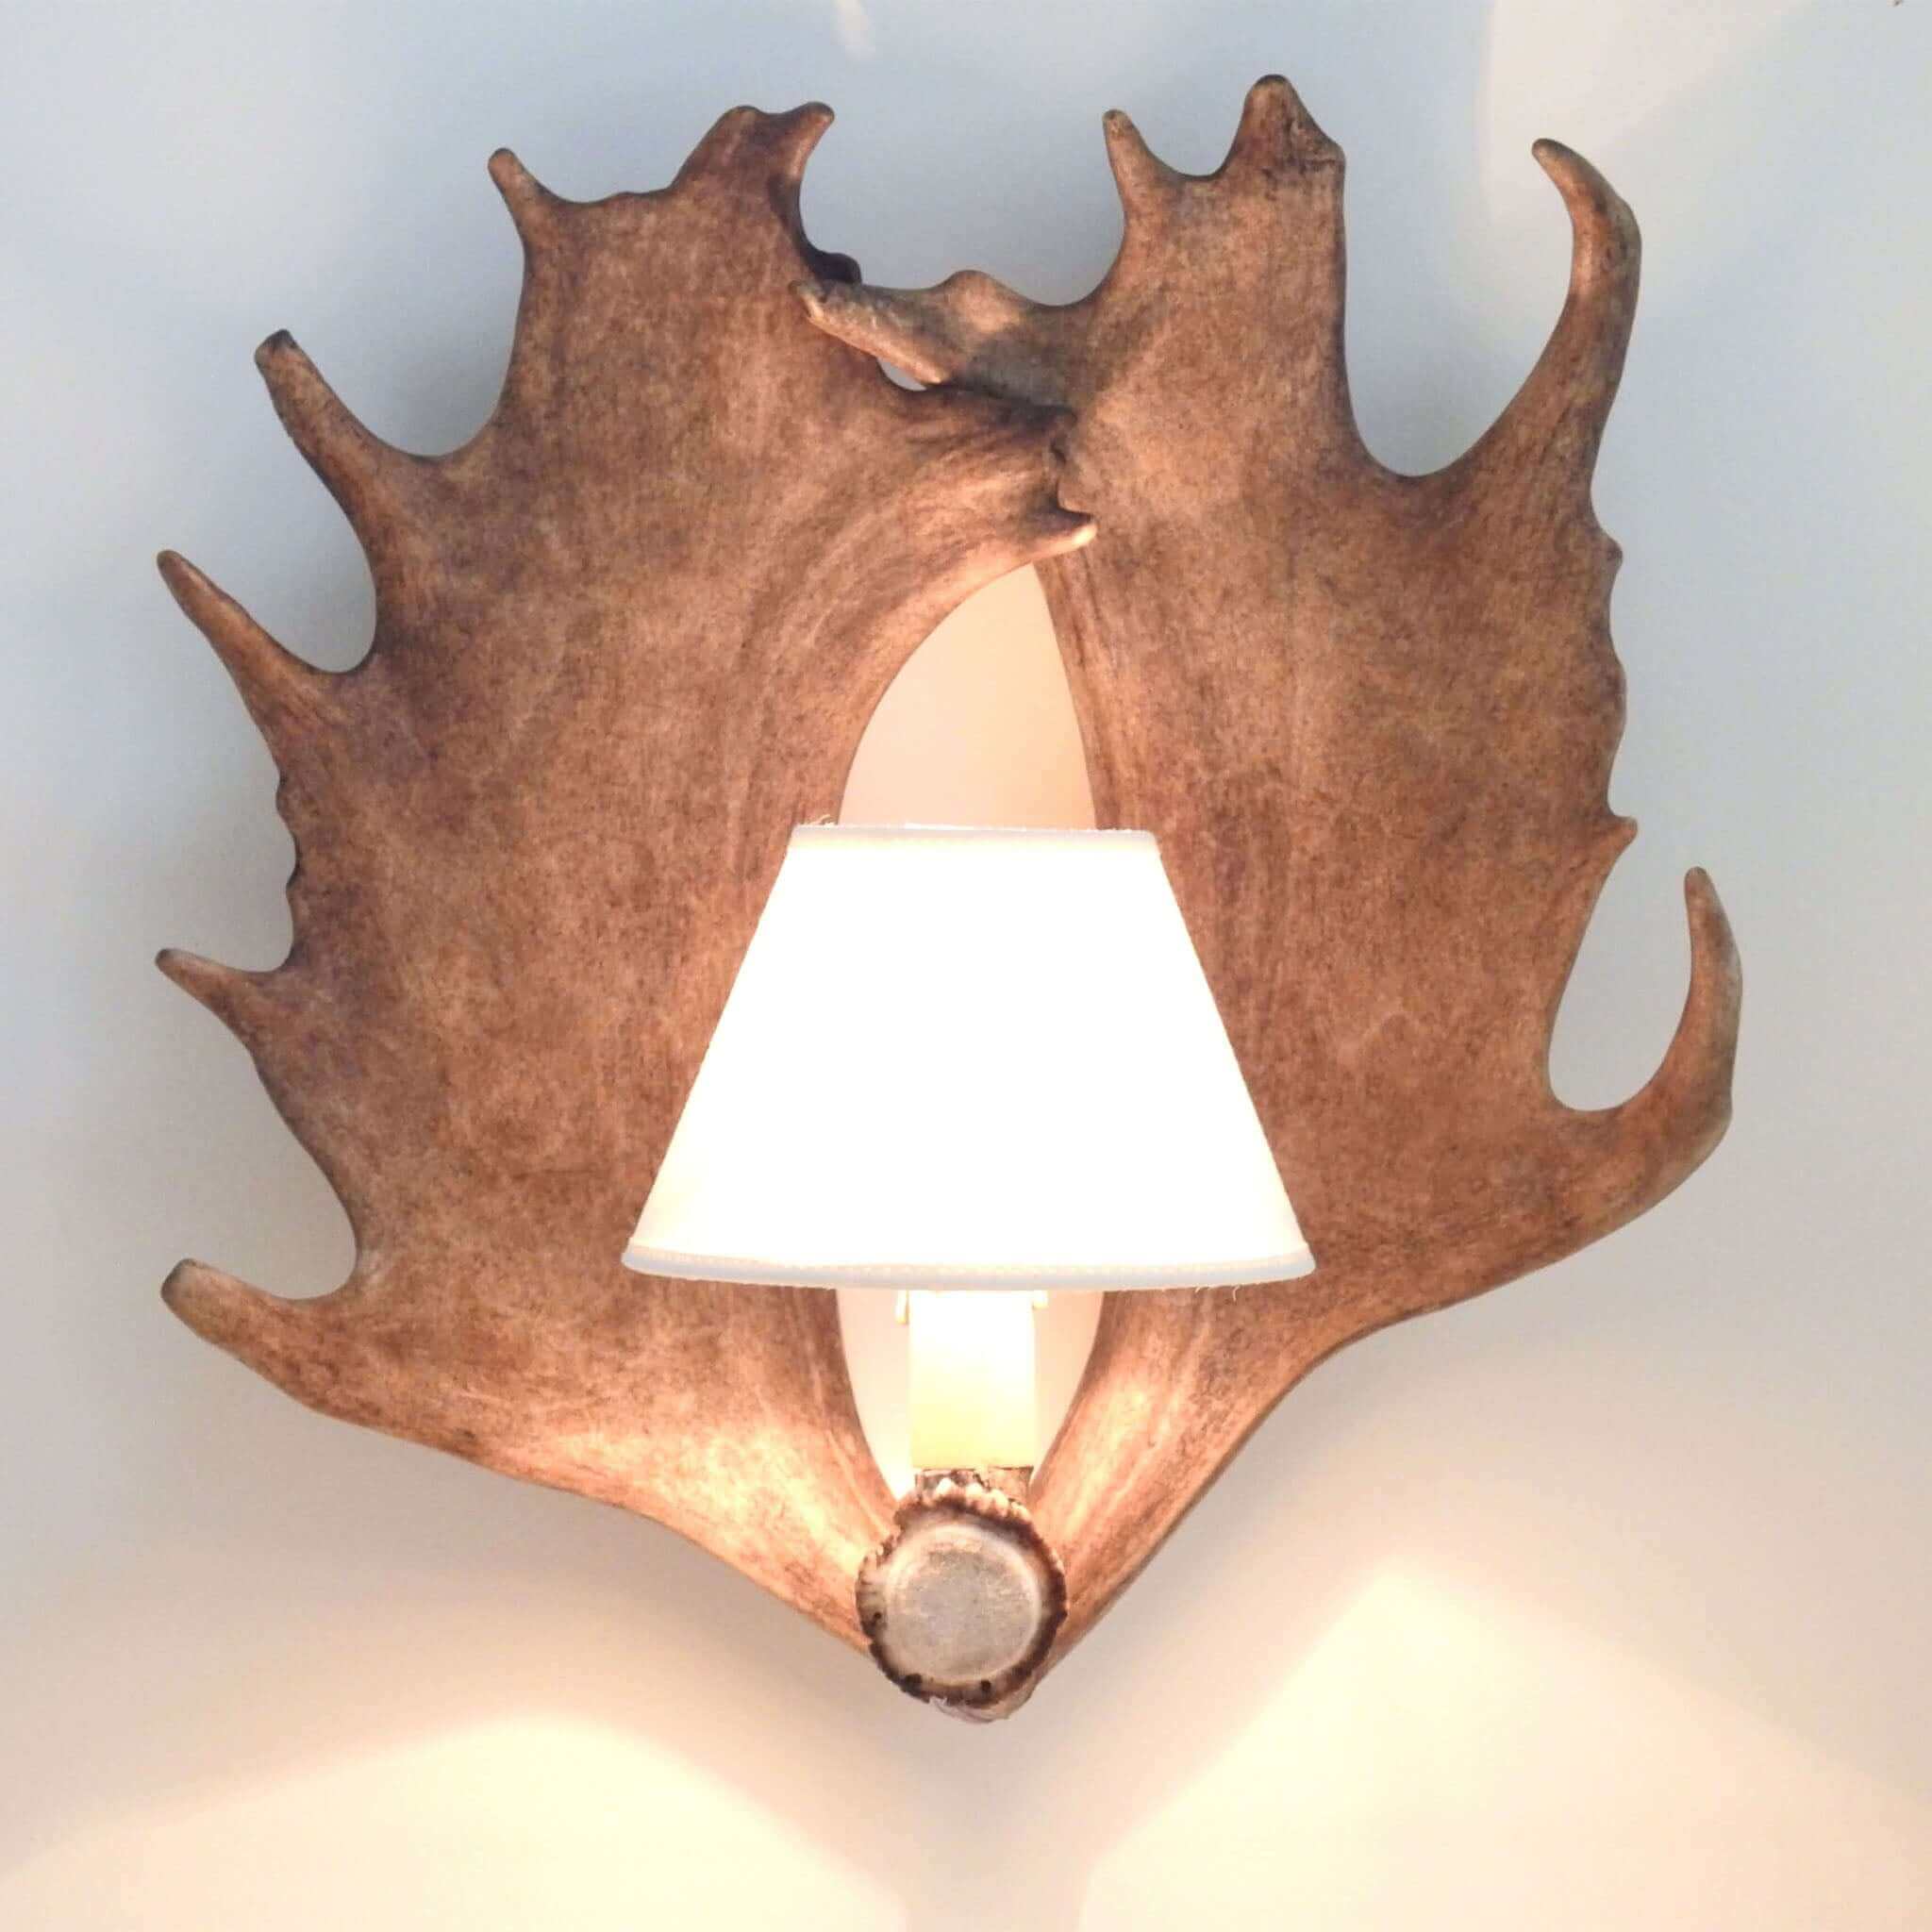 Real, fallow deer antler sconce with shade.